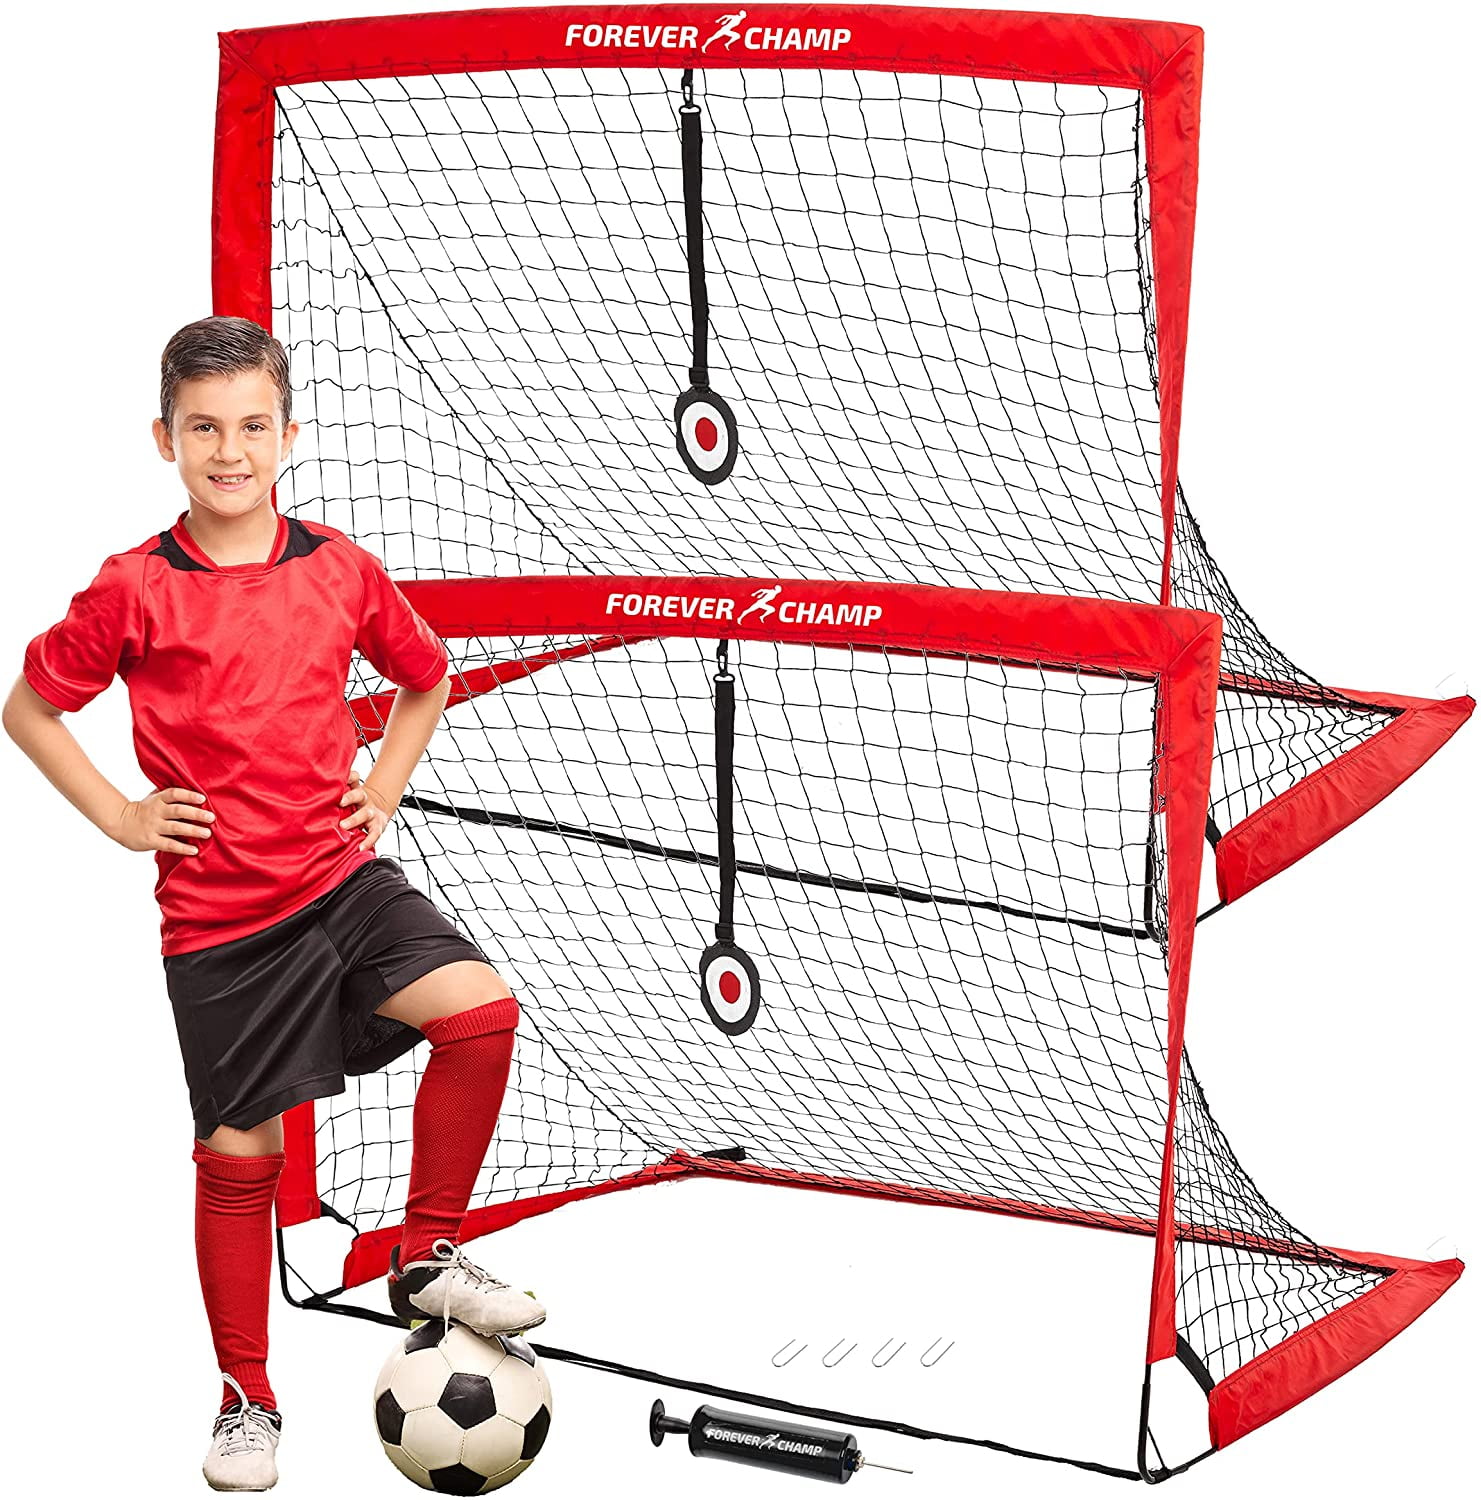 Perfect for Kids & Adults in Indoor or Outdoor Use Yesland 2 Pack Foldable Pop Up Soccer Goal Nets 2.8 × 1.5 Feet Portable Training Football Net with Stake and Portable Carrying Case 